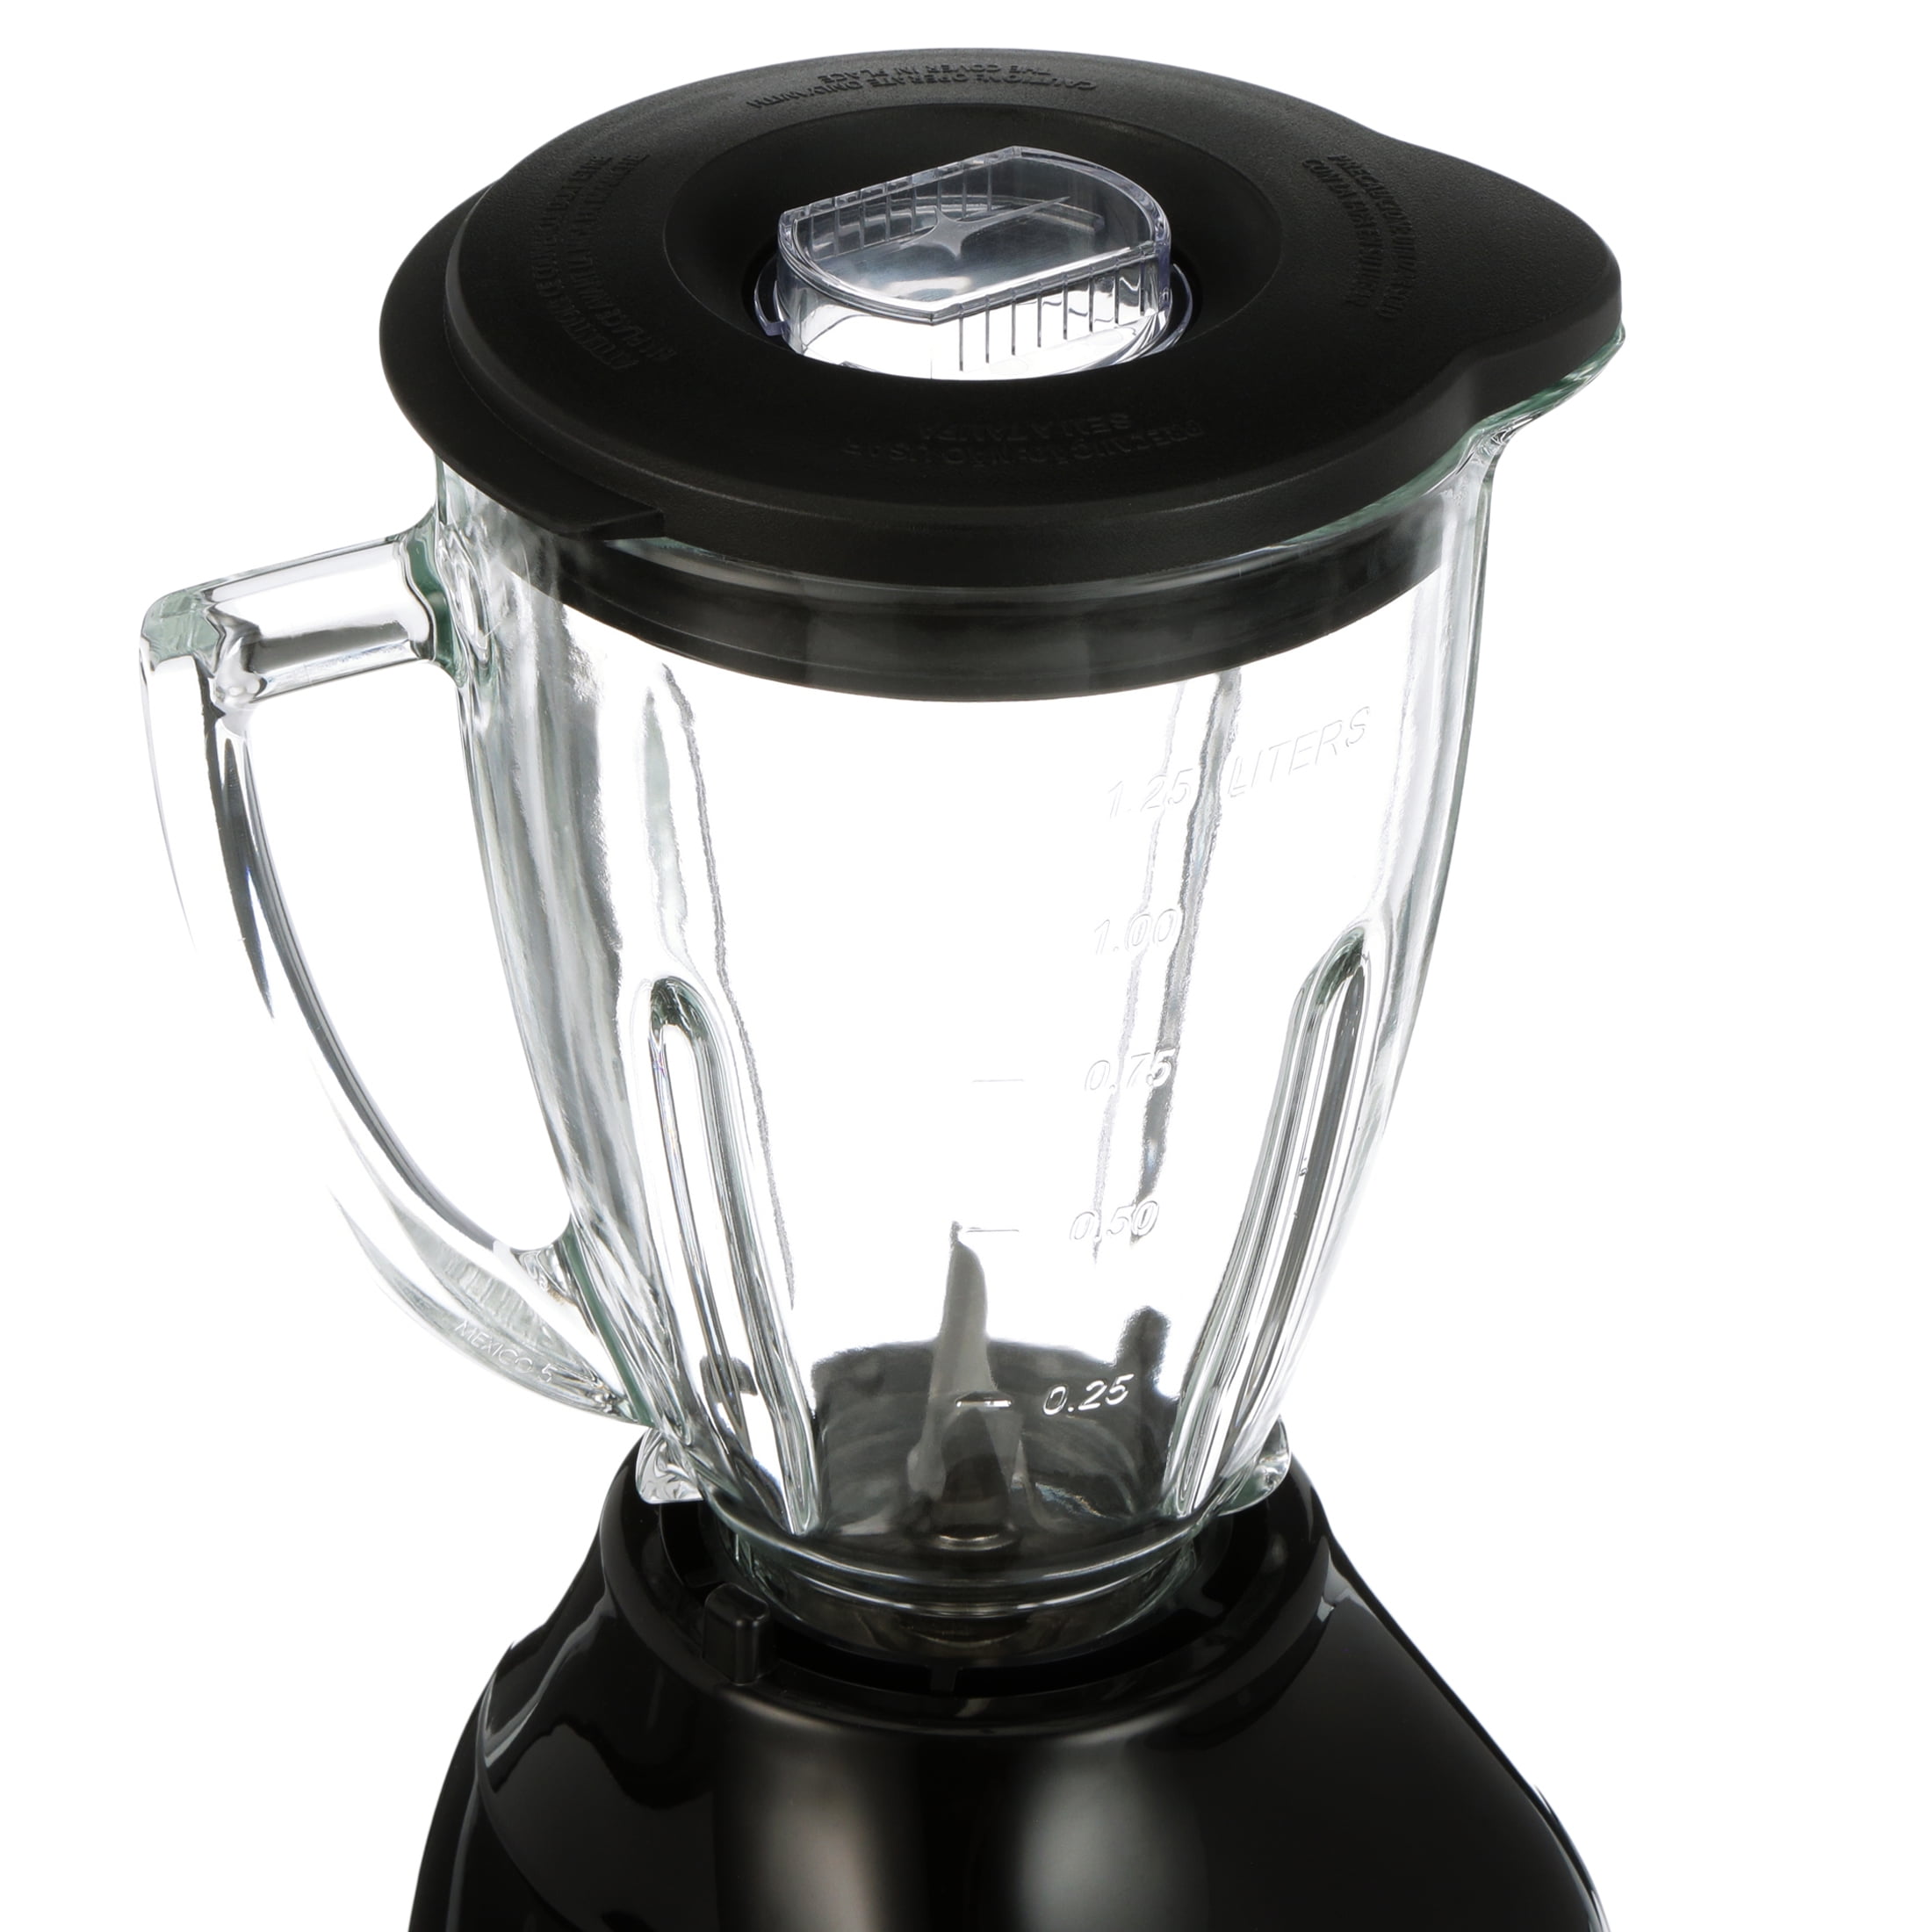 Oster 6 Cup 48 oz. 5 Speed 700-Watts Plastic Jar Easy to Use Blender I